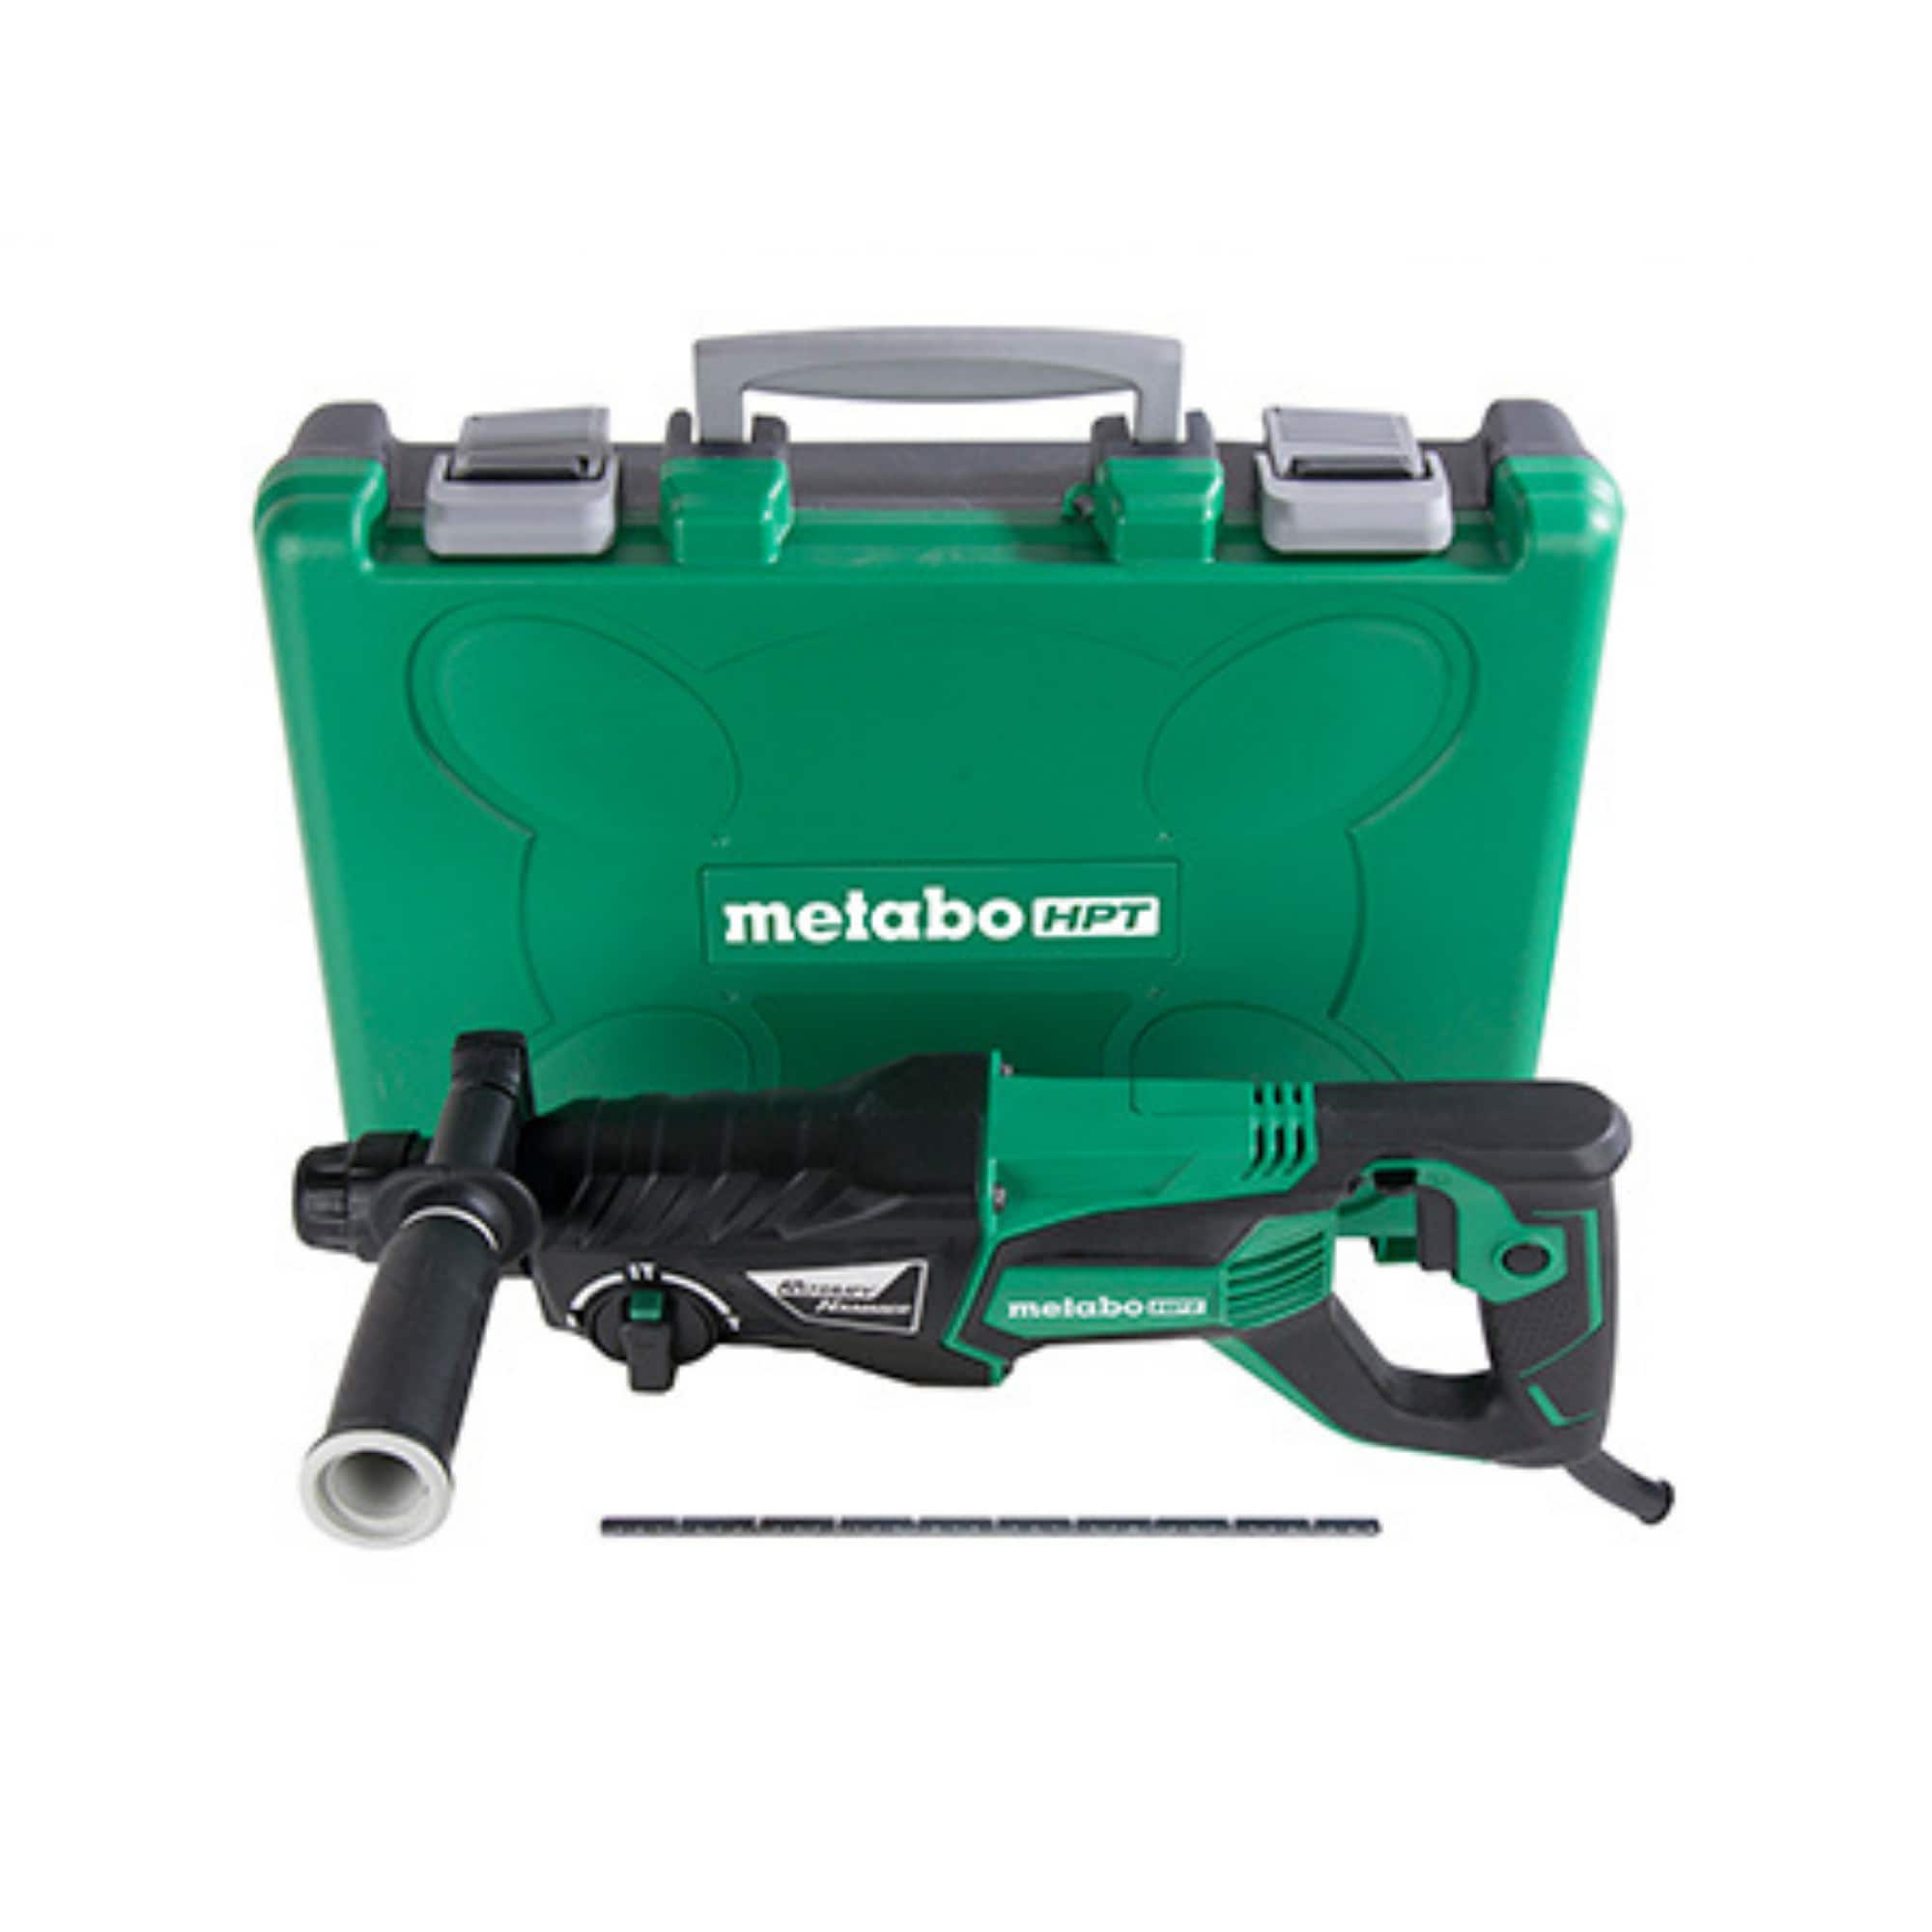 Metabo HPT Sds-plus Sds-plus Variable Speed Corded Rotary Hammer Drill (Included)